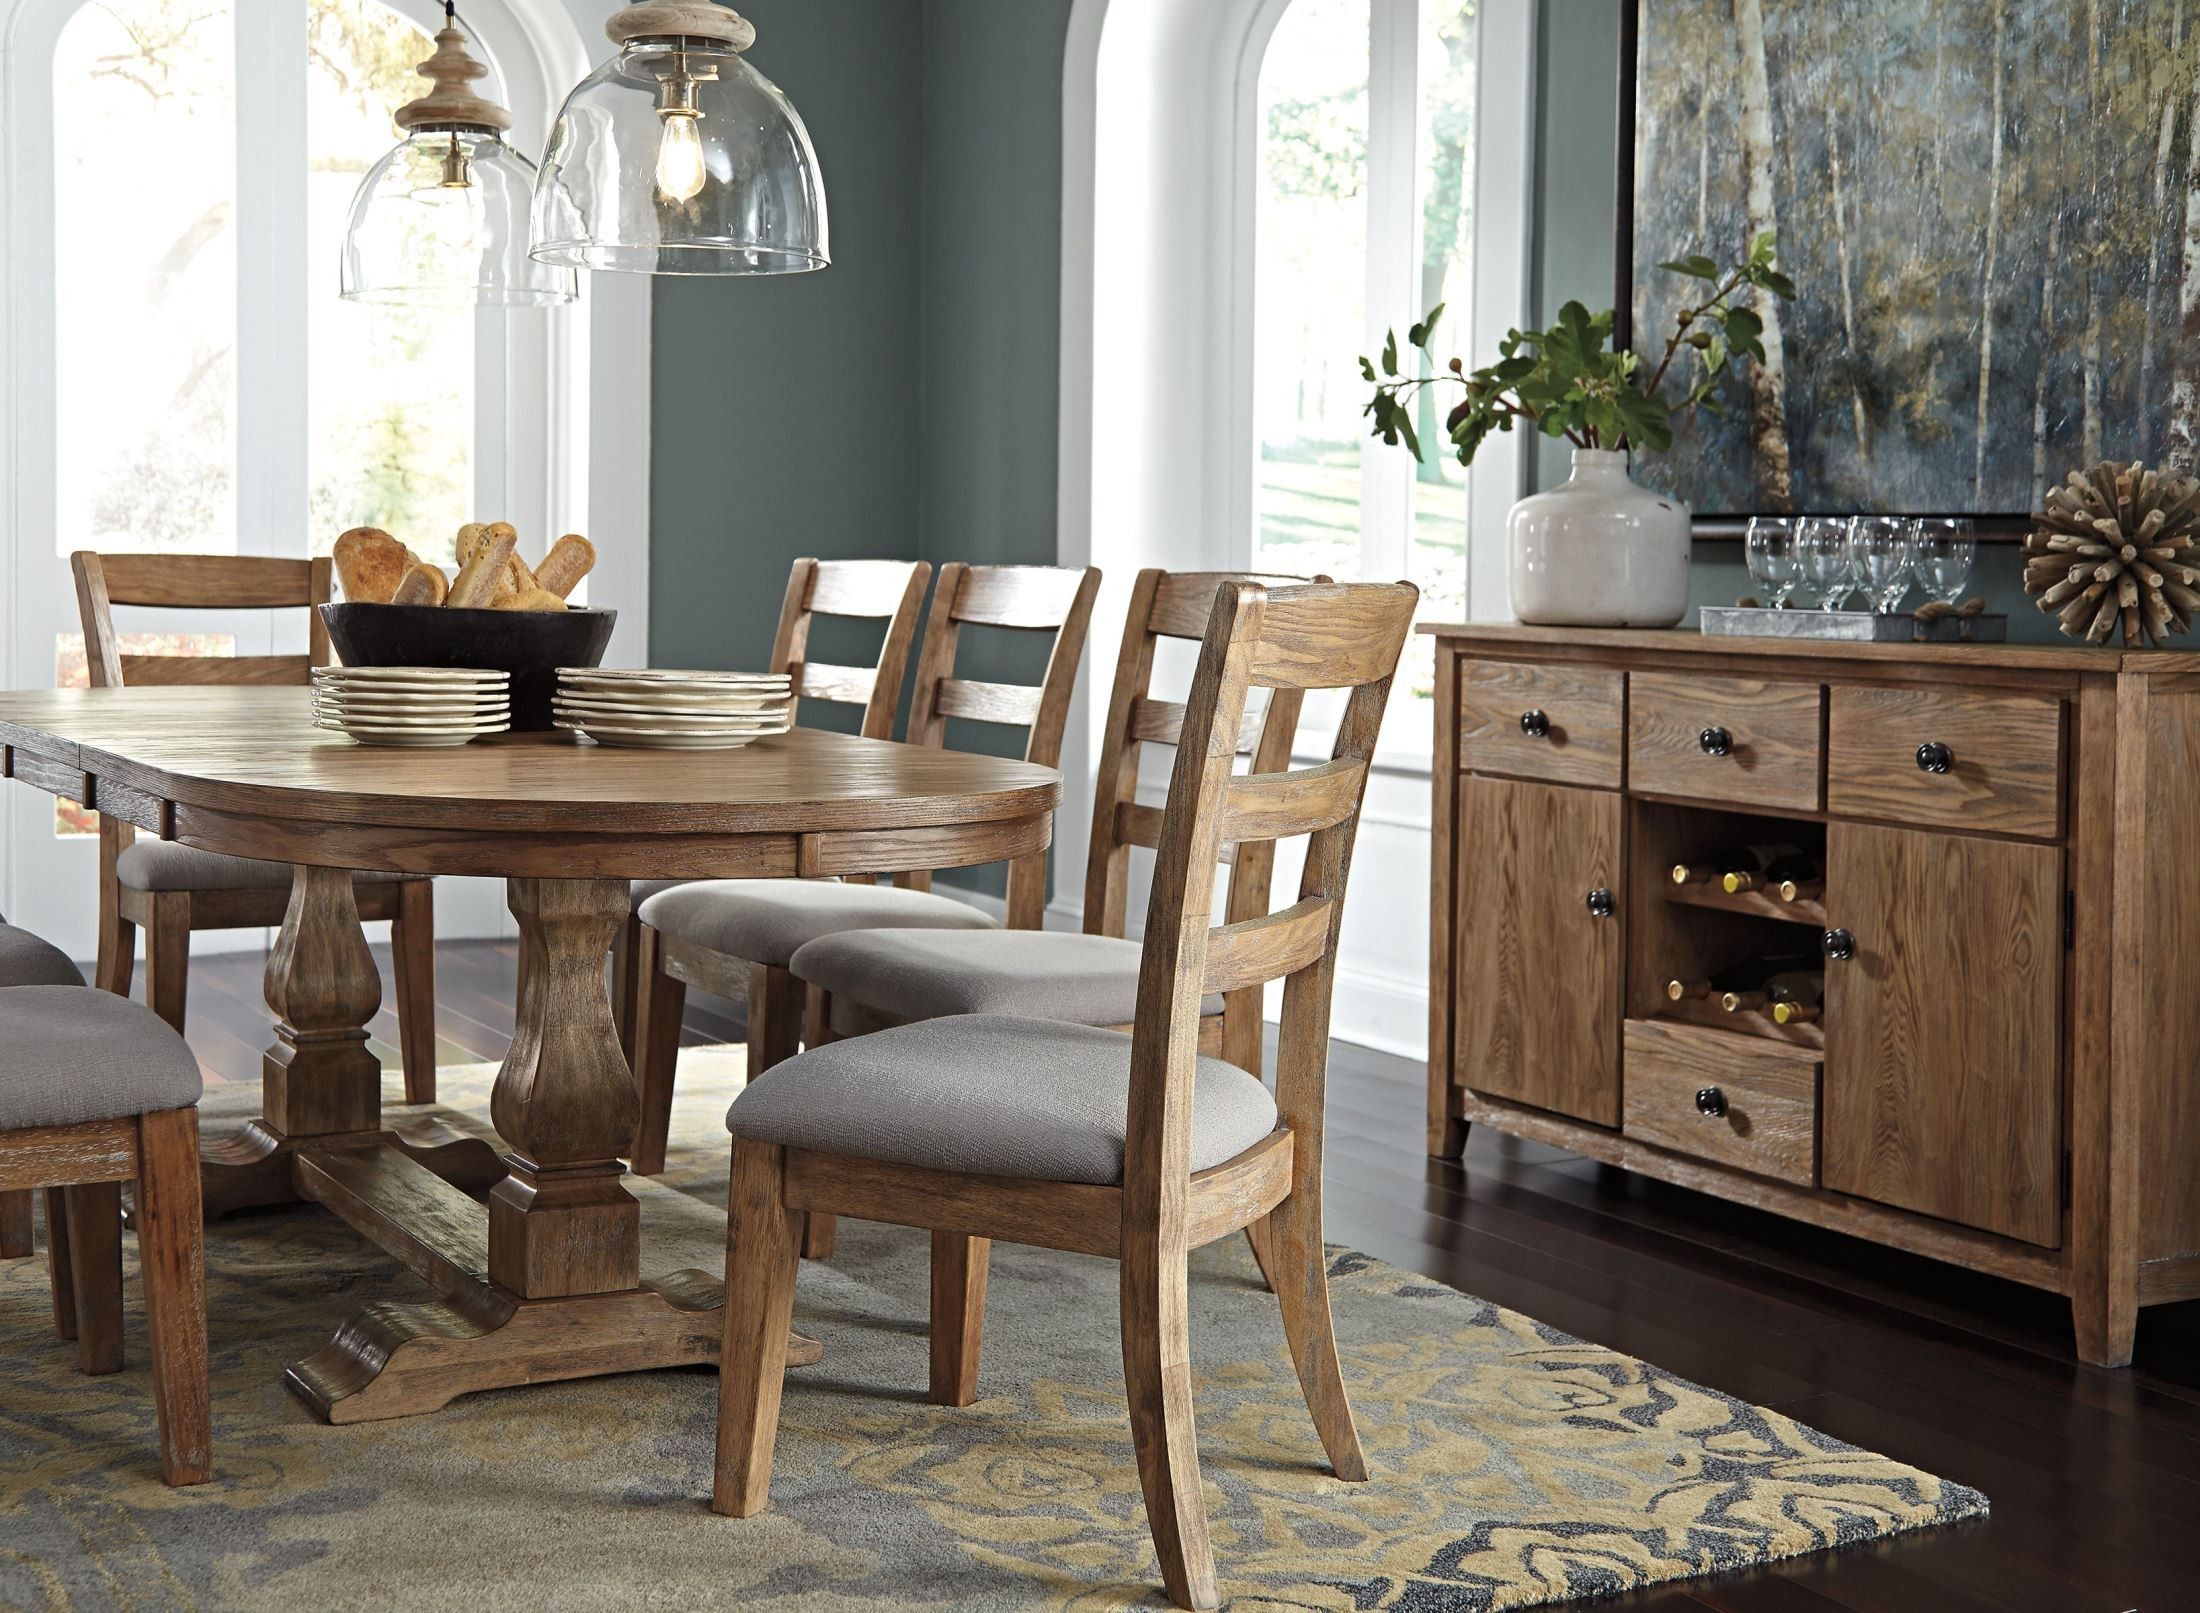 Danimore Light Brown Extendable Oval Dining Room Set From Ashley (D473 Within Extendable Oval Dining Sets (View 14 of 15)